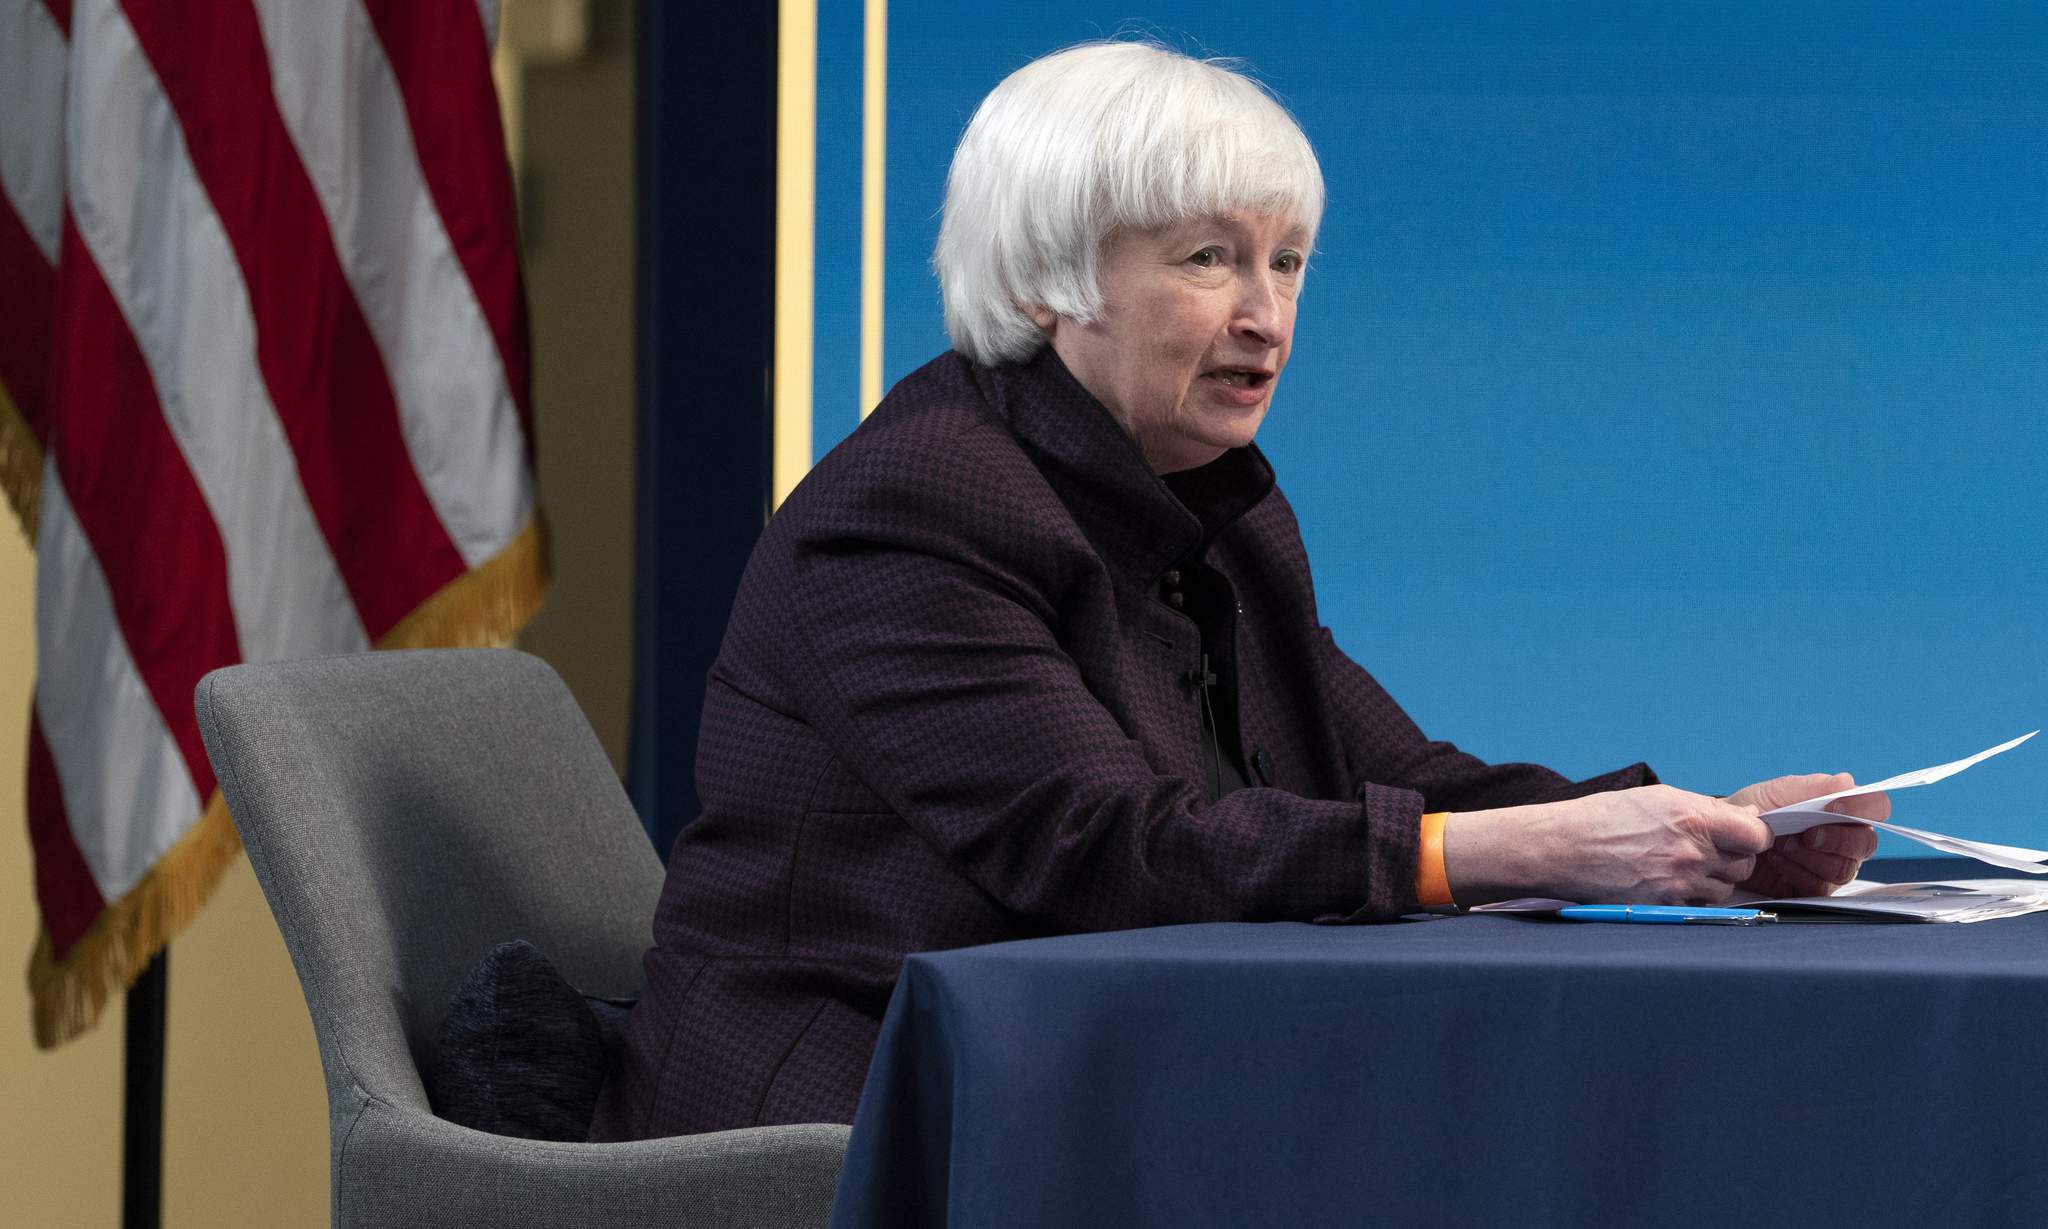 Yellen, Powell say more needed to limit US economic damage